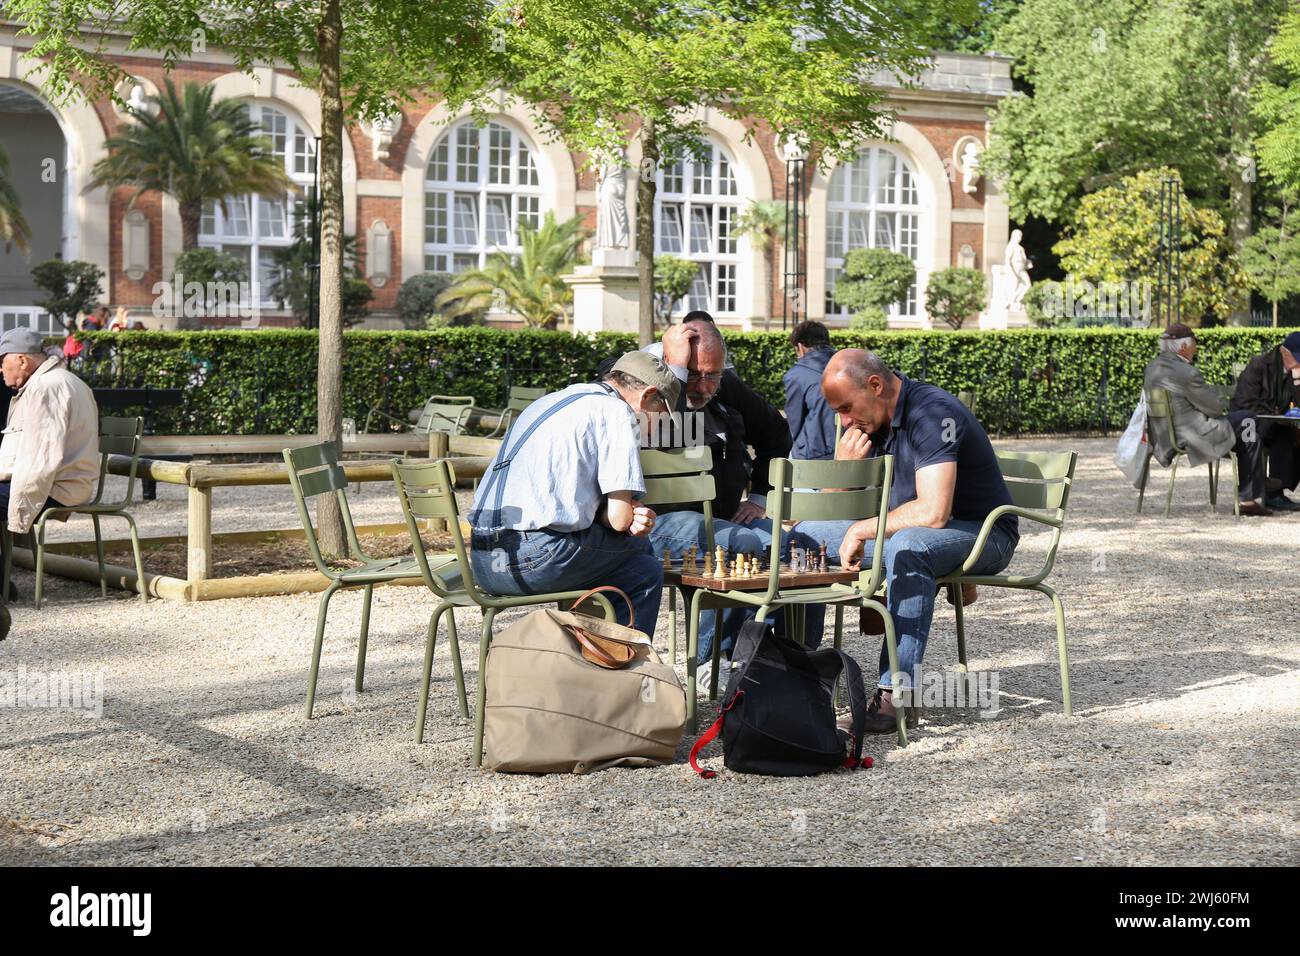 25.04. 2018 - France, Paris - People play chess in the park on a sunny holiday, strategy, leisure, and outdoor activities Stock Photo